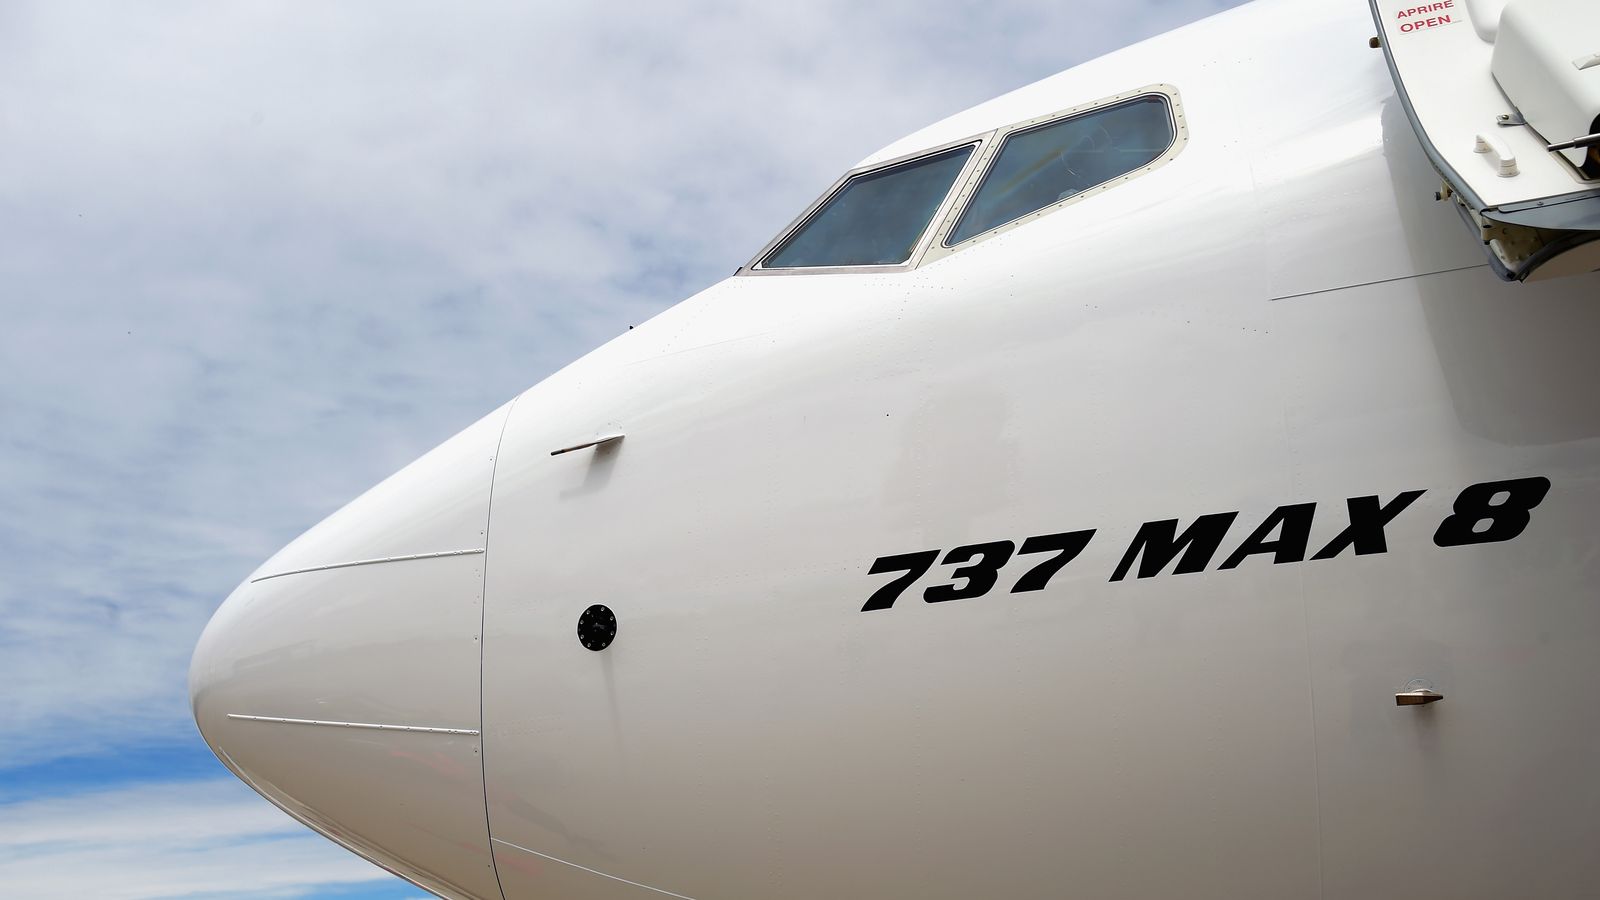 Nations and air regulators join FAA's Boeing 737 MAX safety review panel